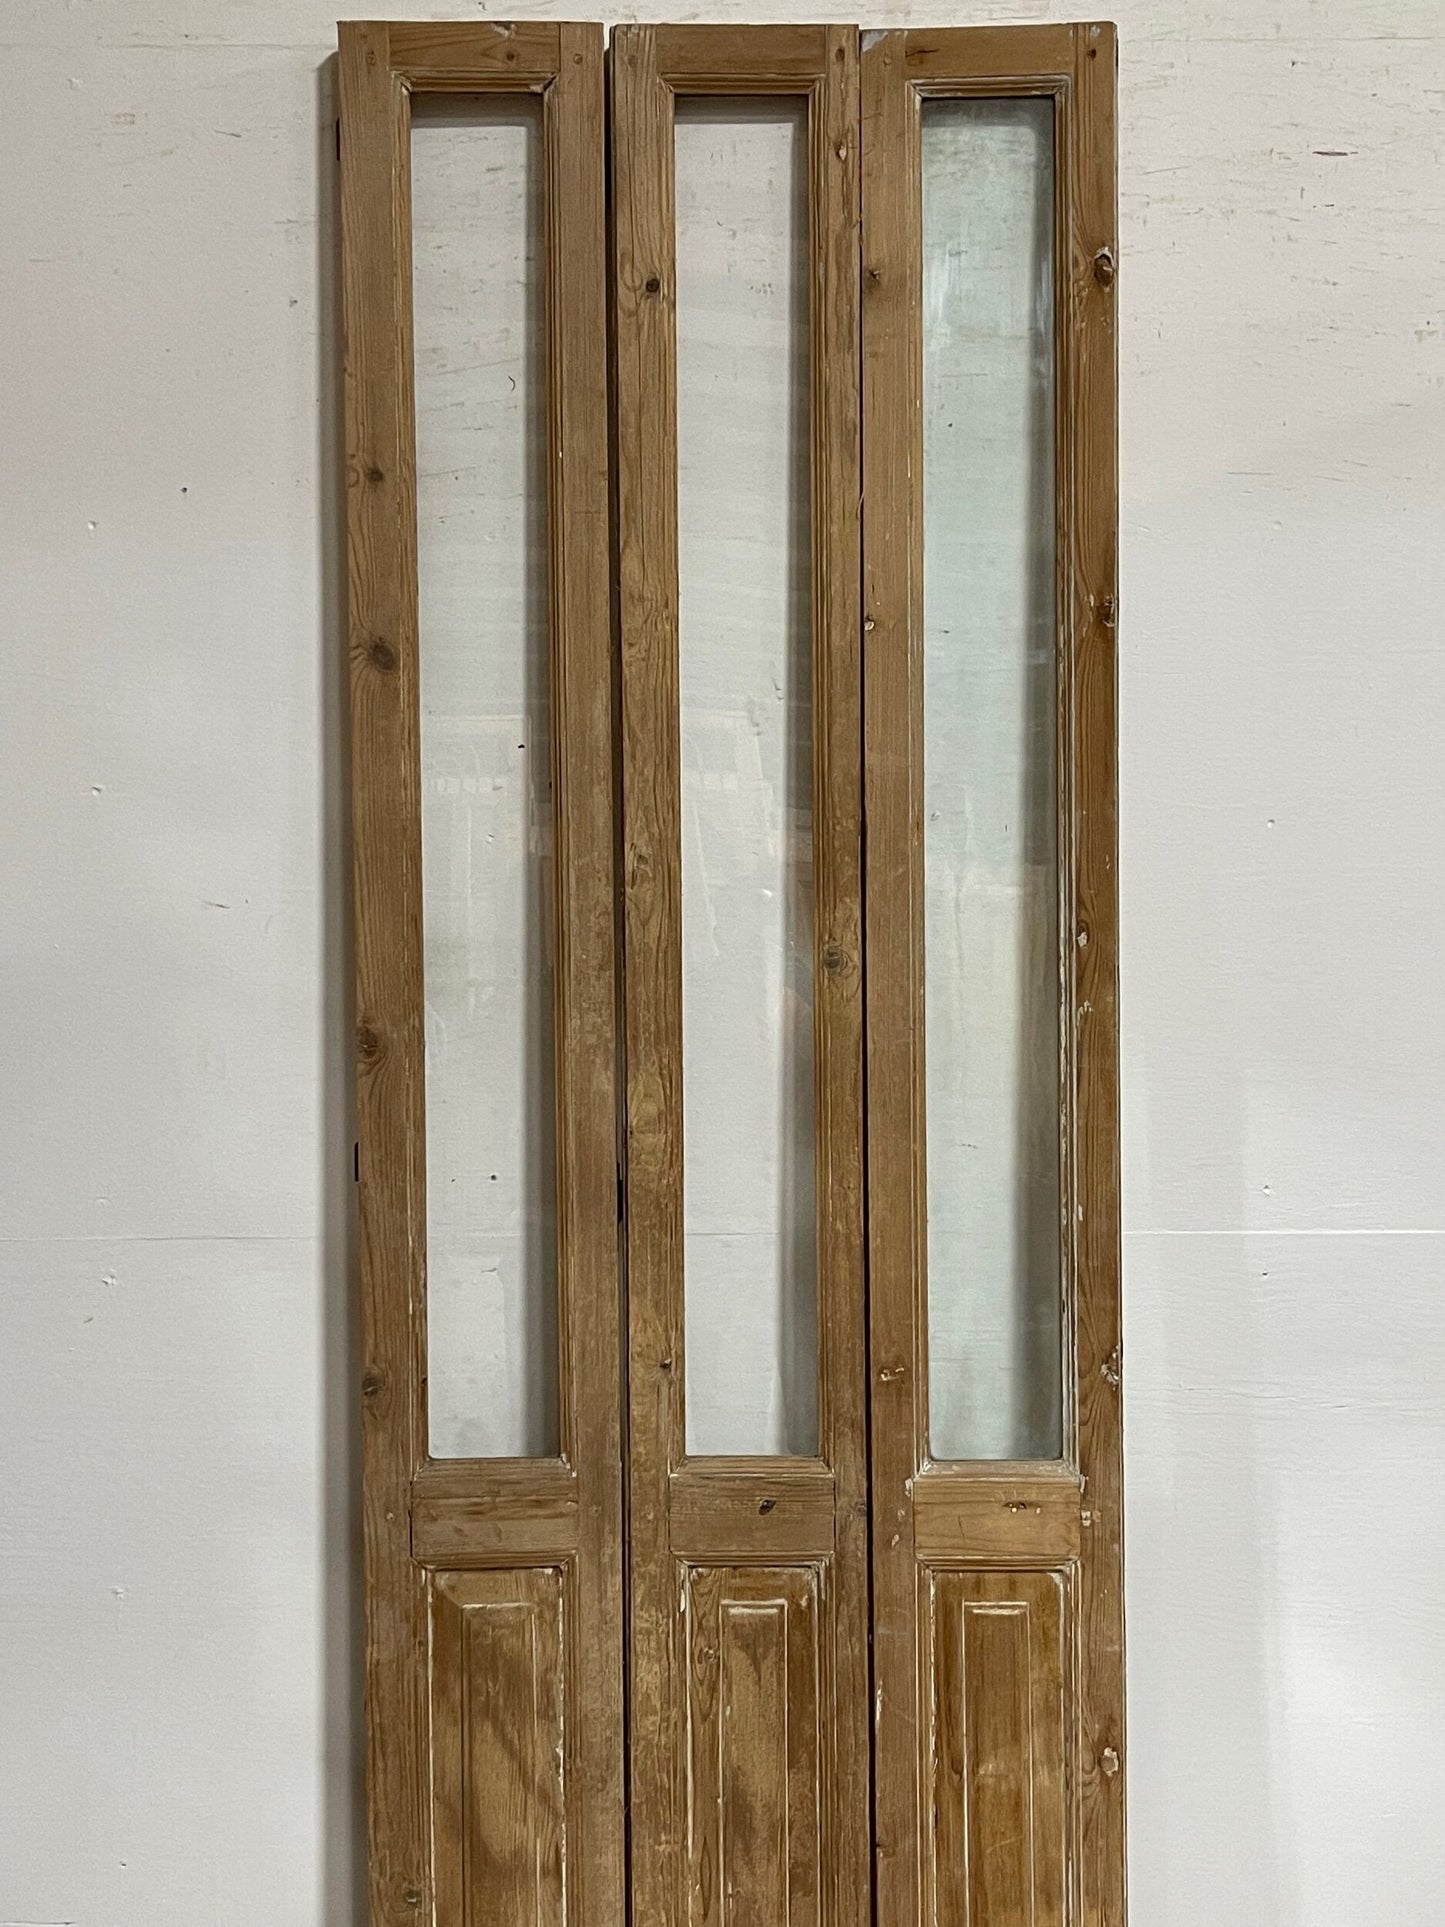 Antique French doors with glass (96.25x30.25) H0255s